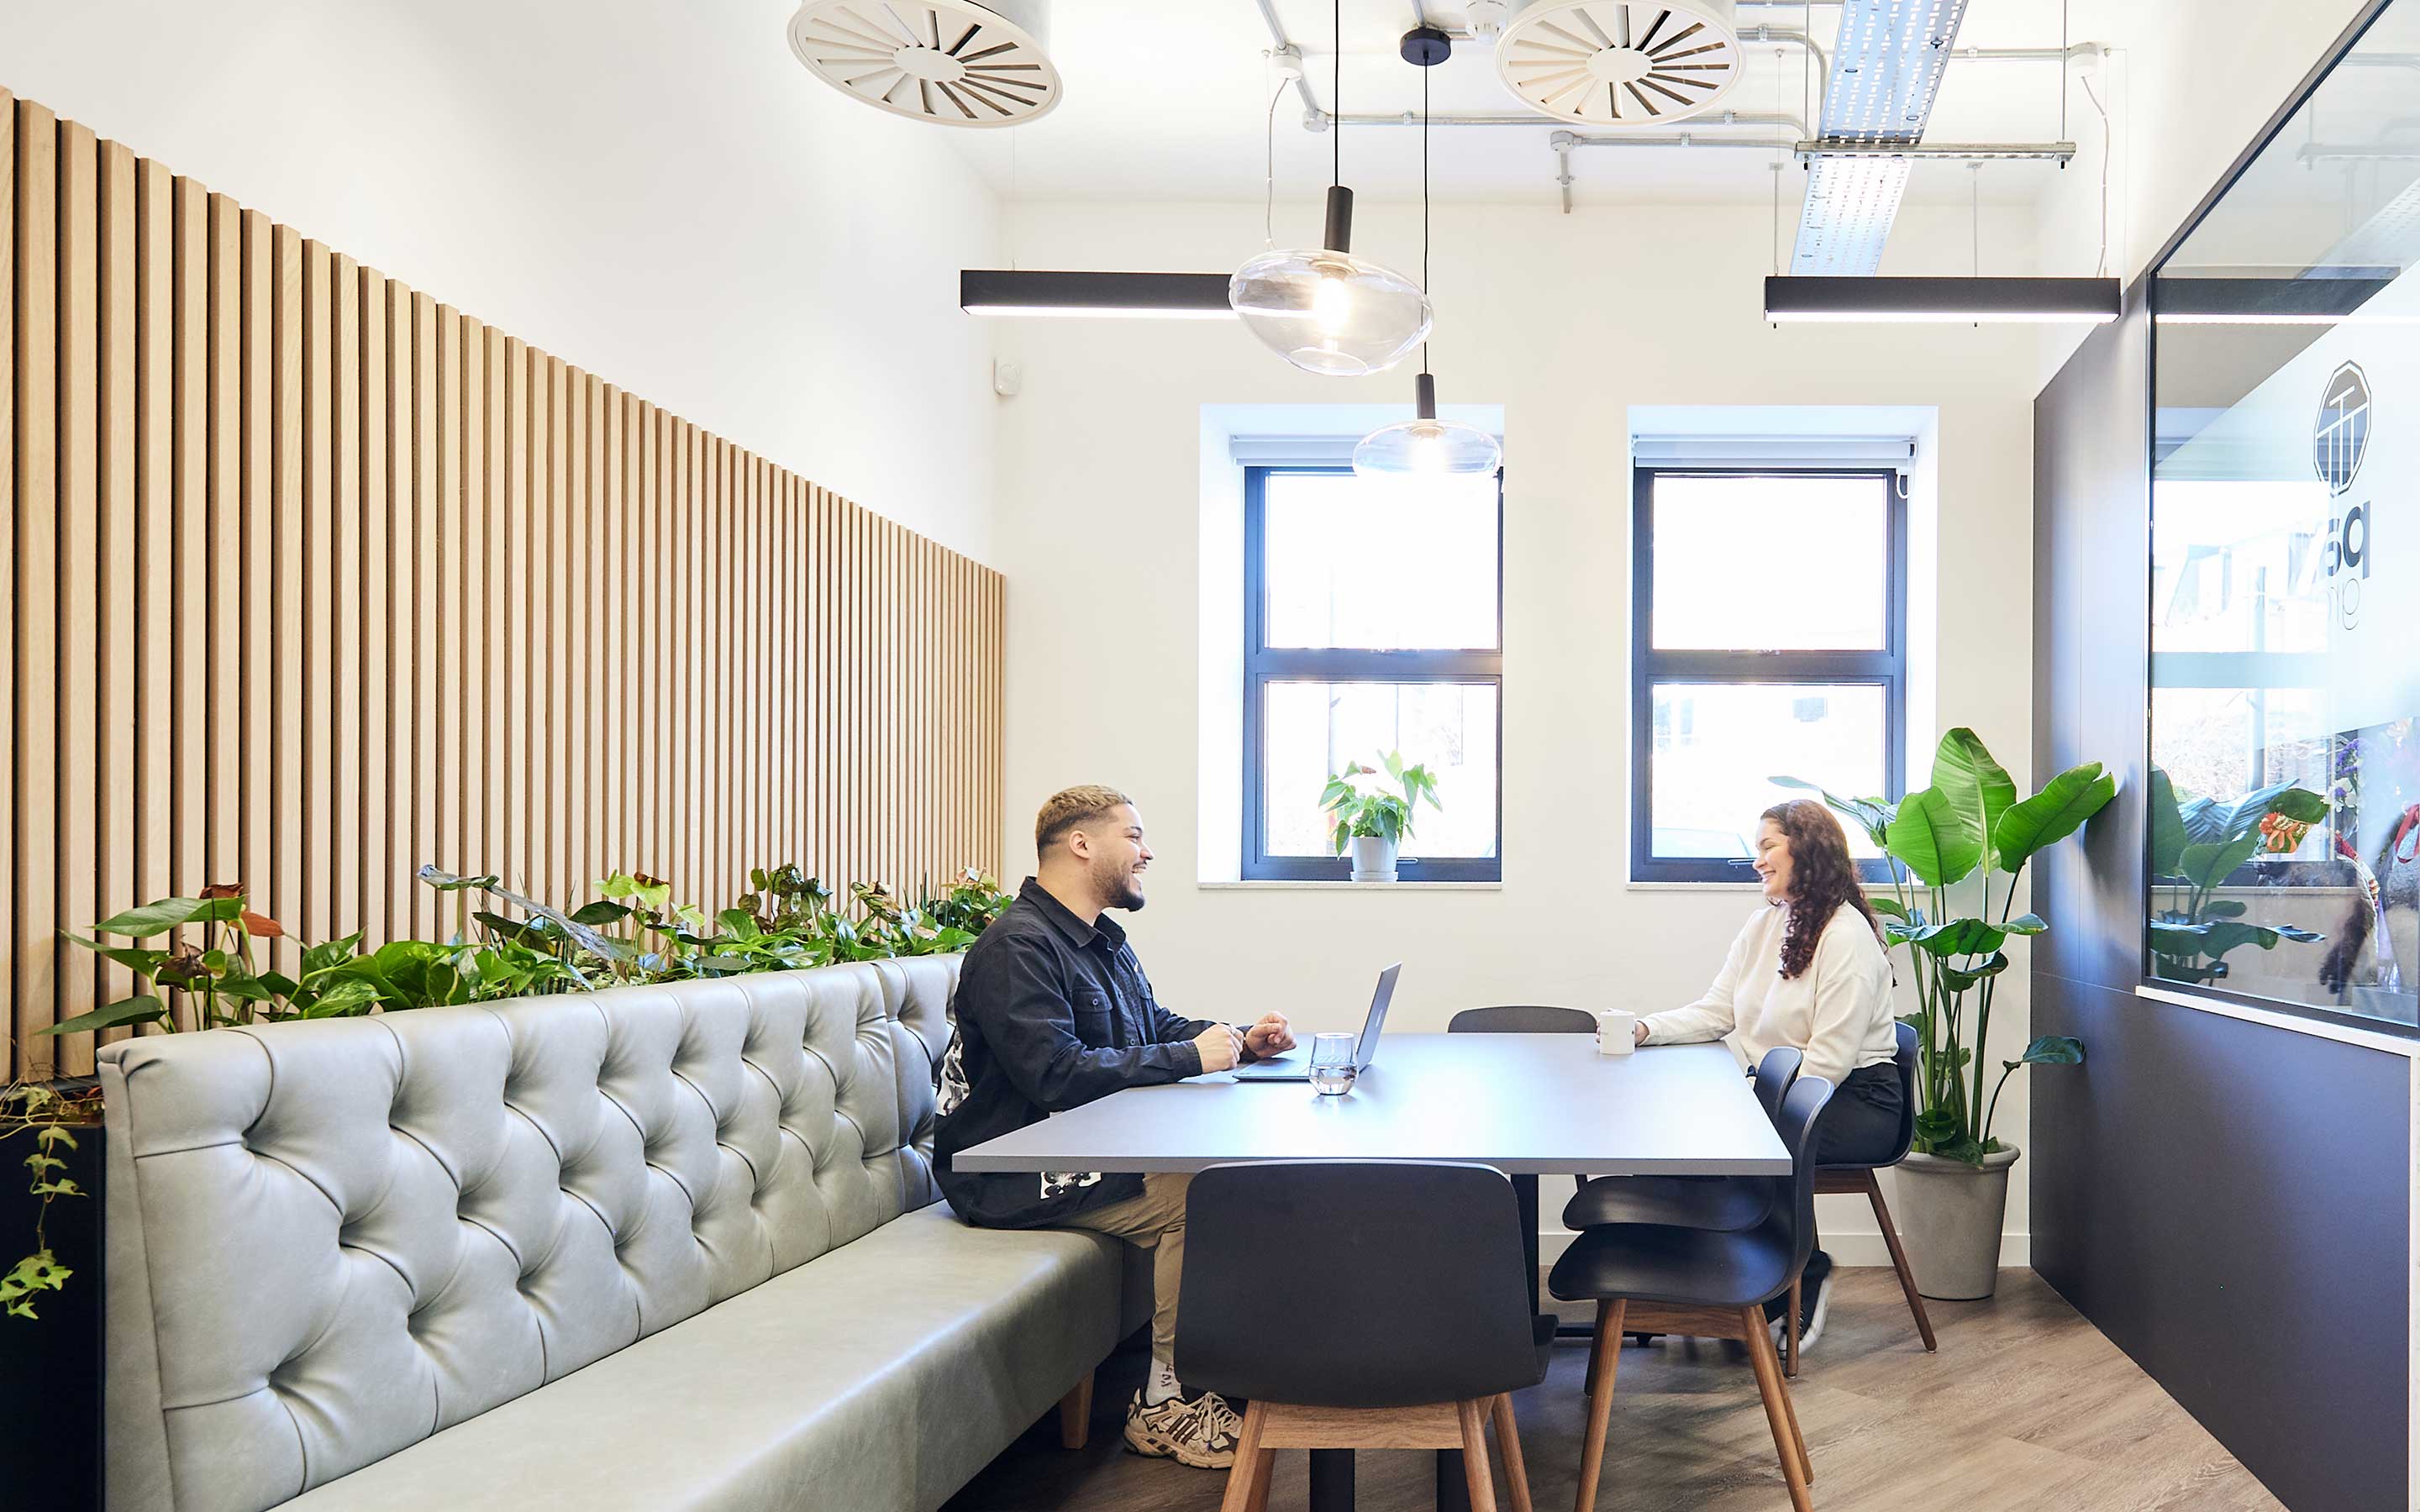 Office space with employees laughing at a stylish table and chairs, with lots of interior plants and exposed mechanical and electrical services